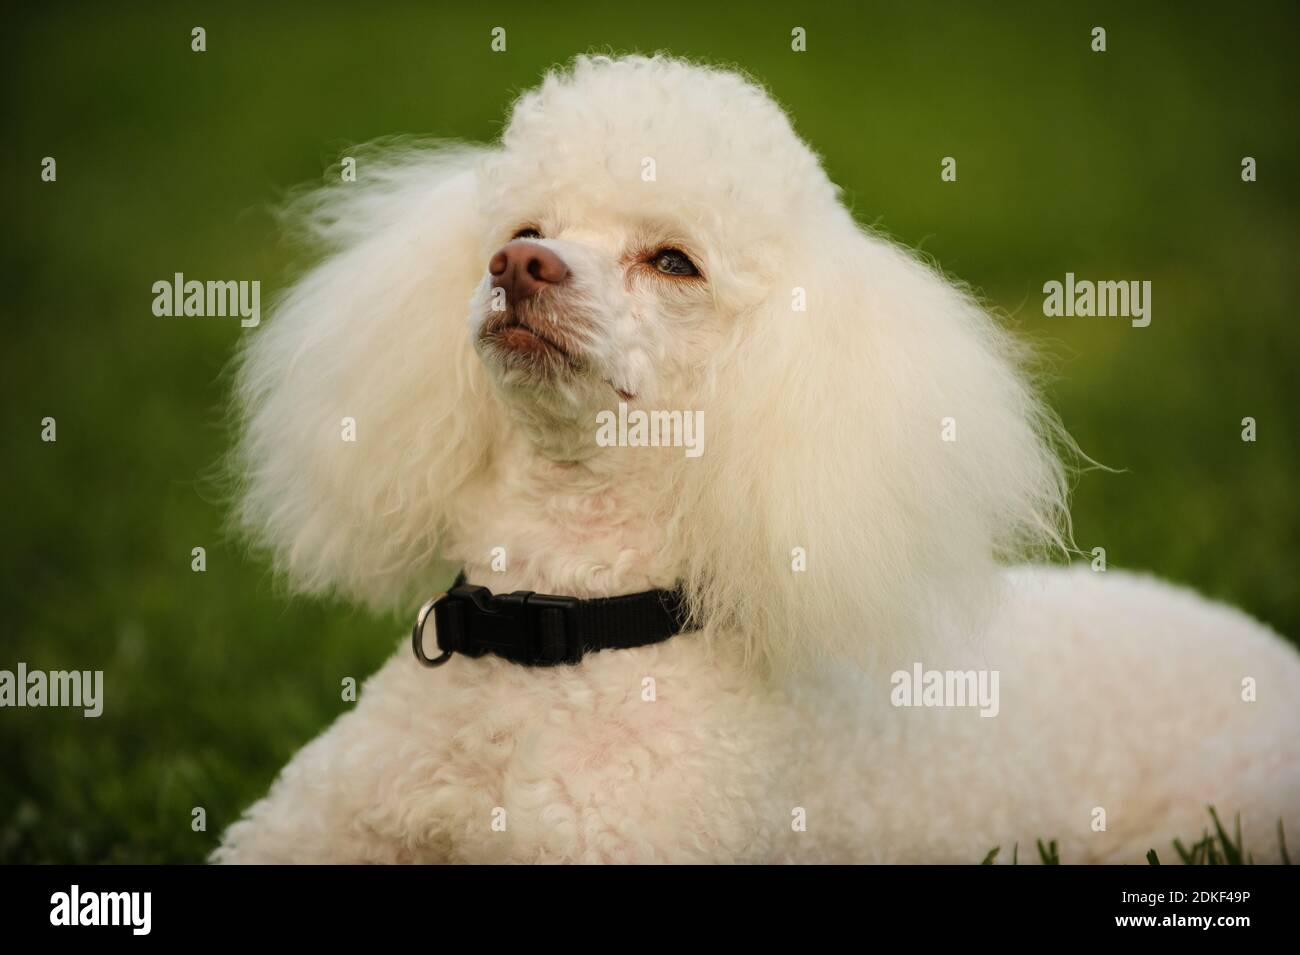 Close-up Of Dog Looking Away Sitting On Field Stock Photo